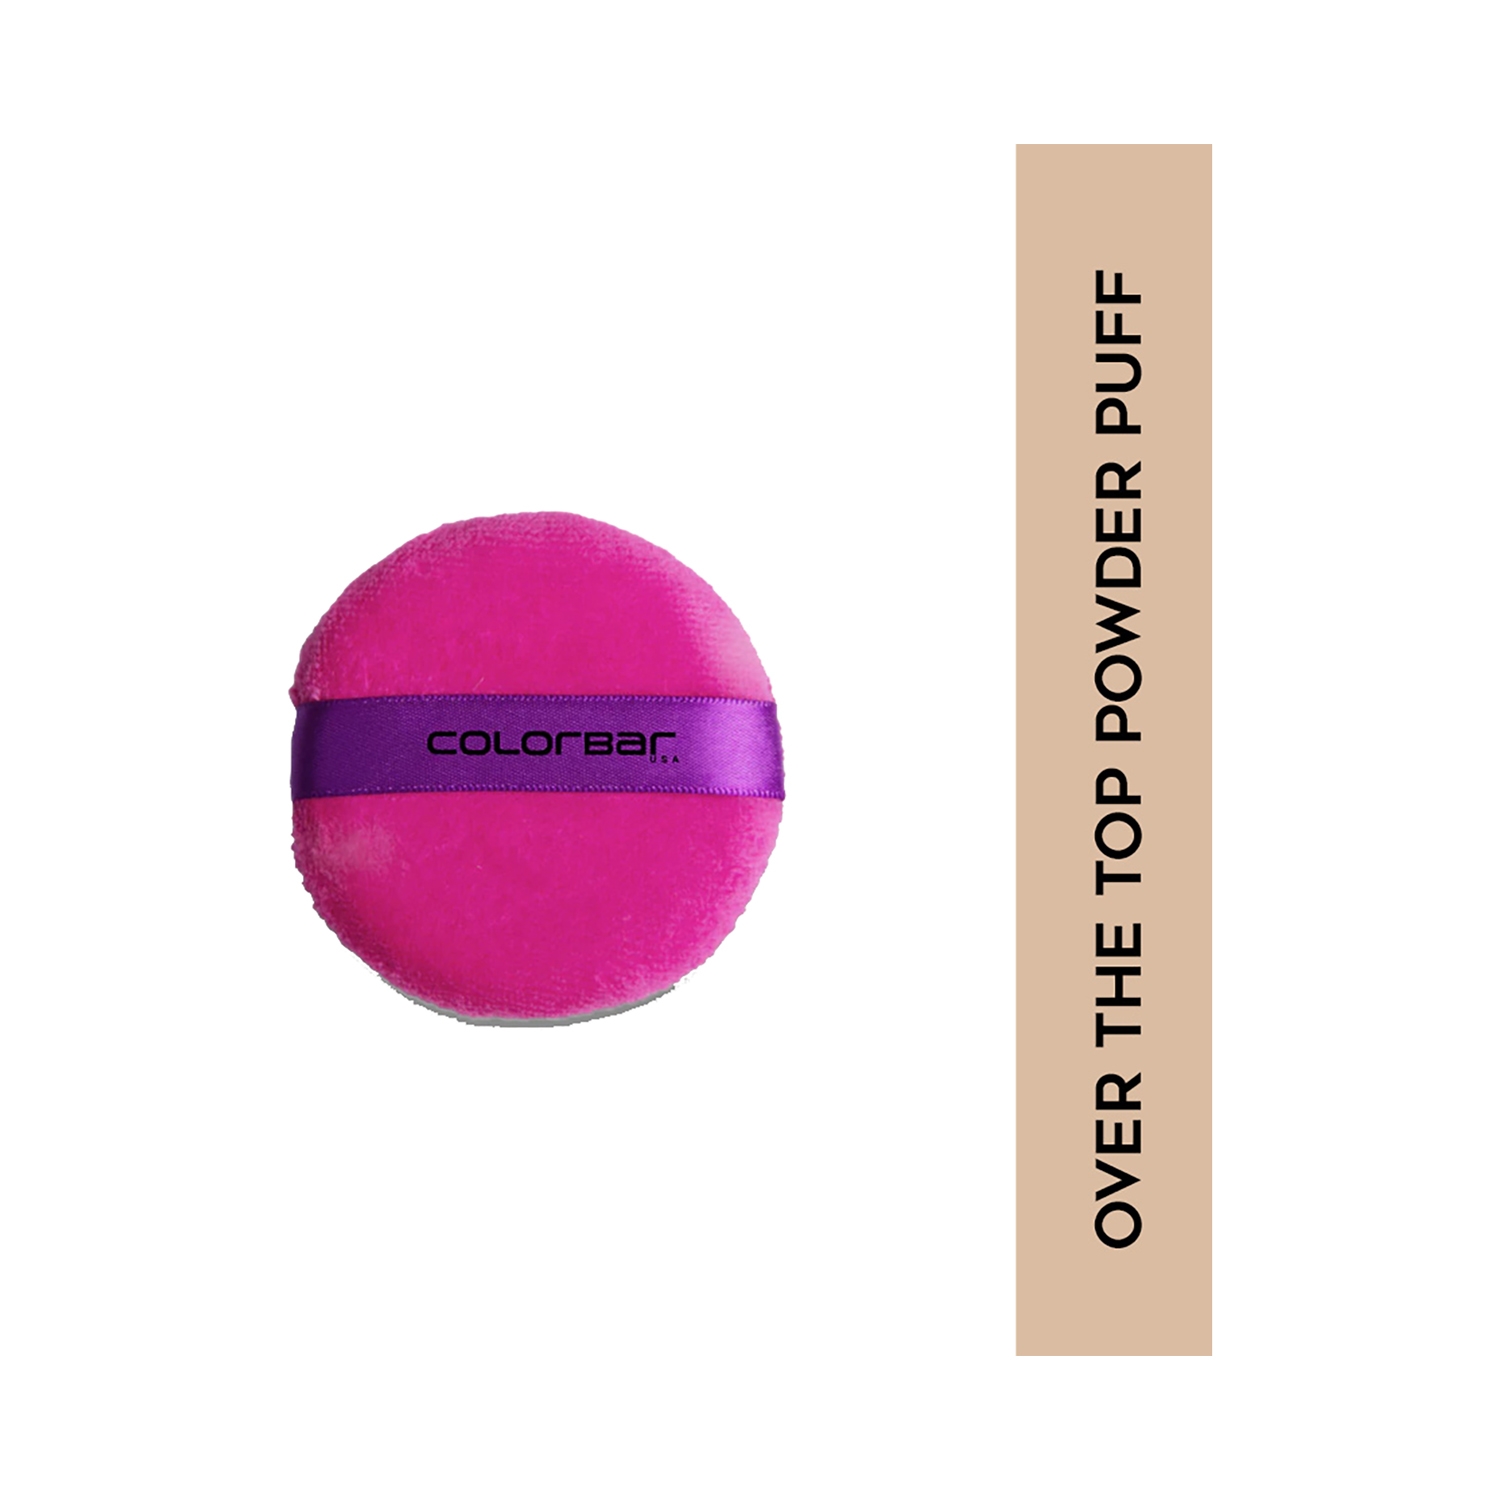 Colorbar | Colorbar Over The Top Powder Puff - Pink